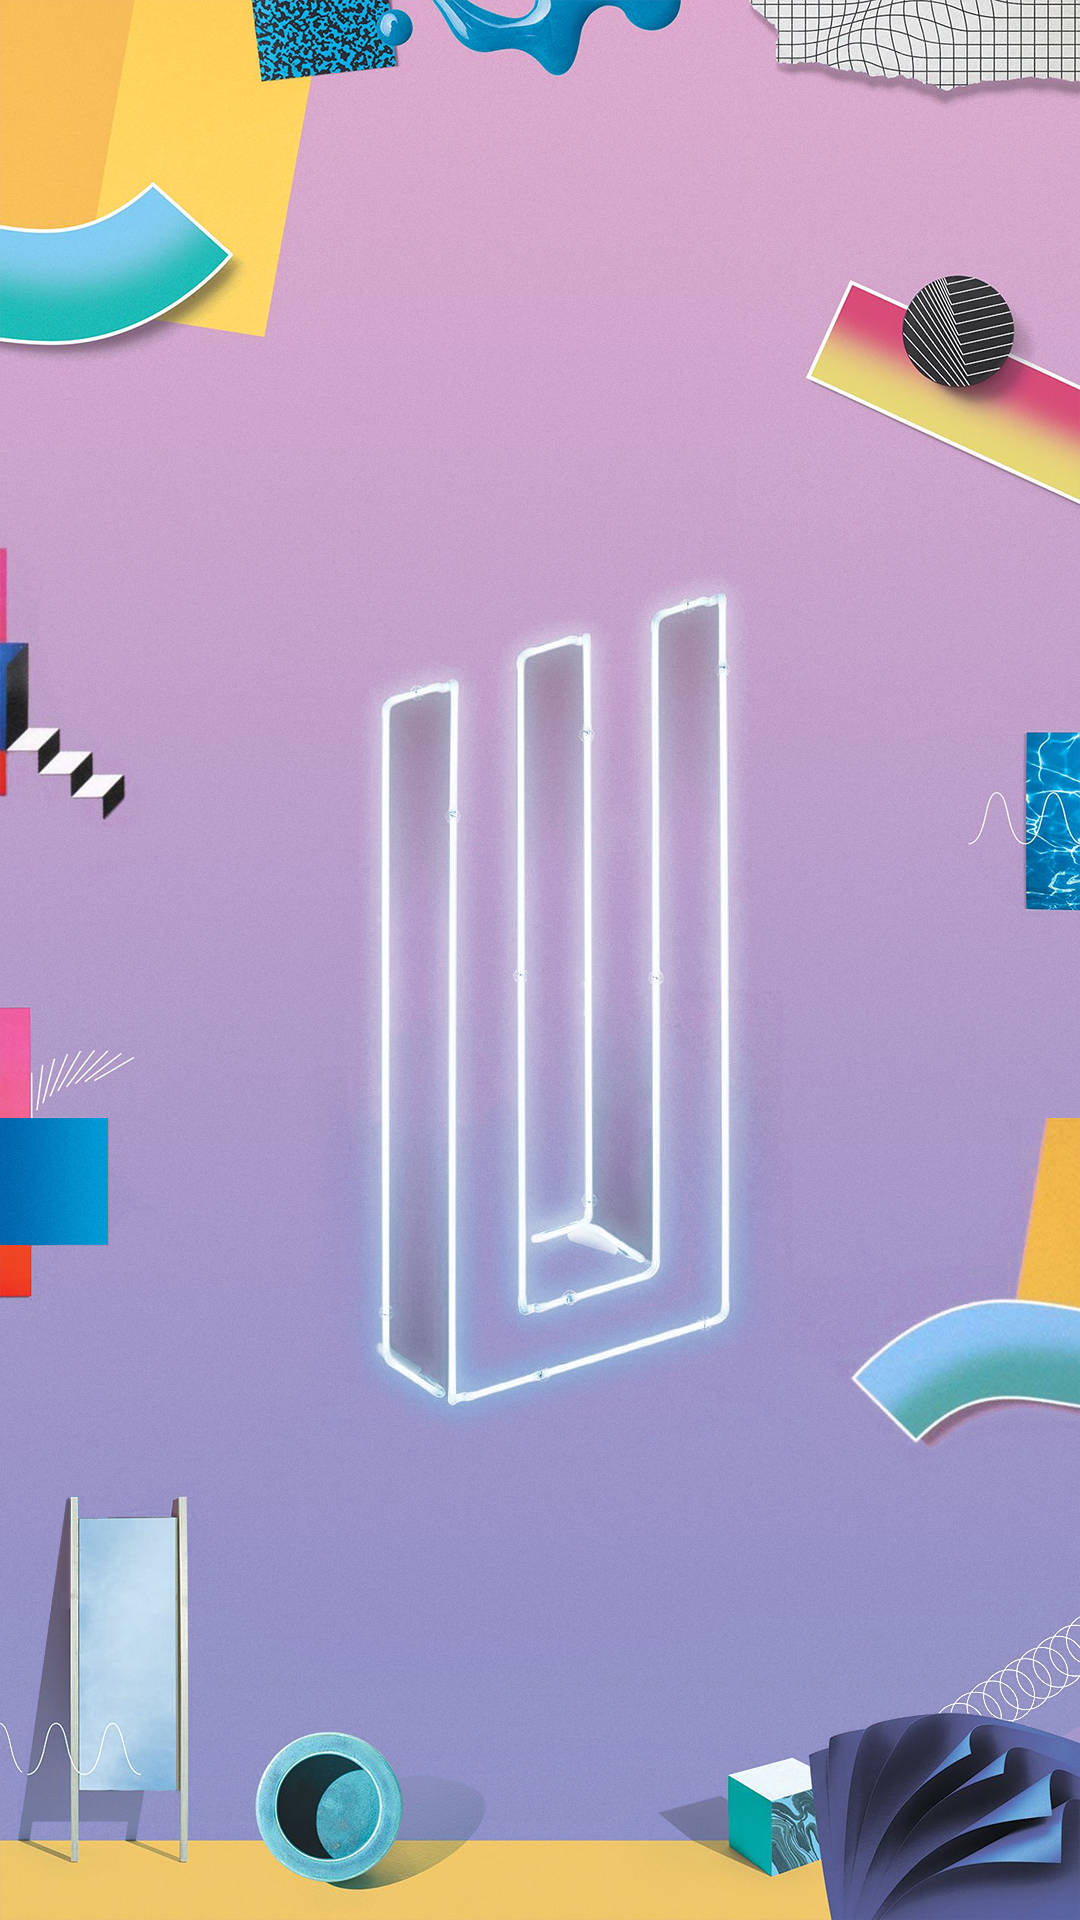 Paramore After Laughter Logo wallpaper.